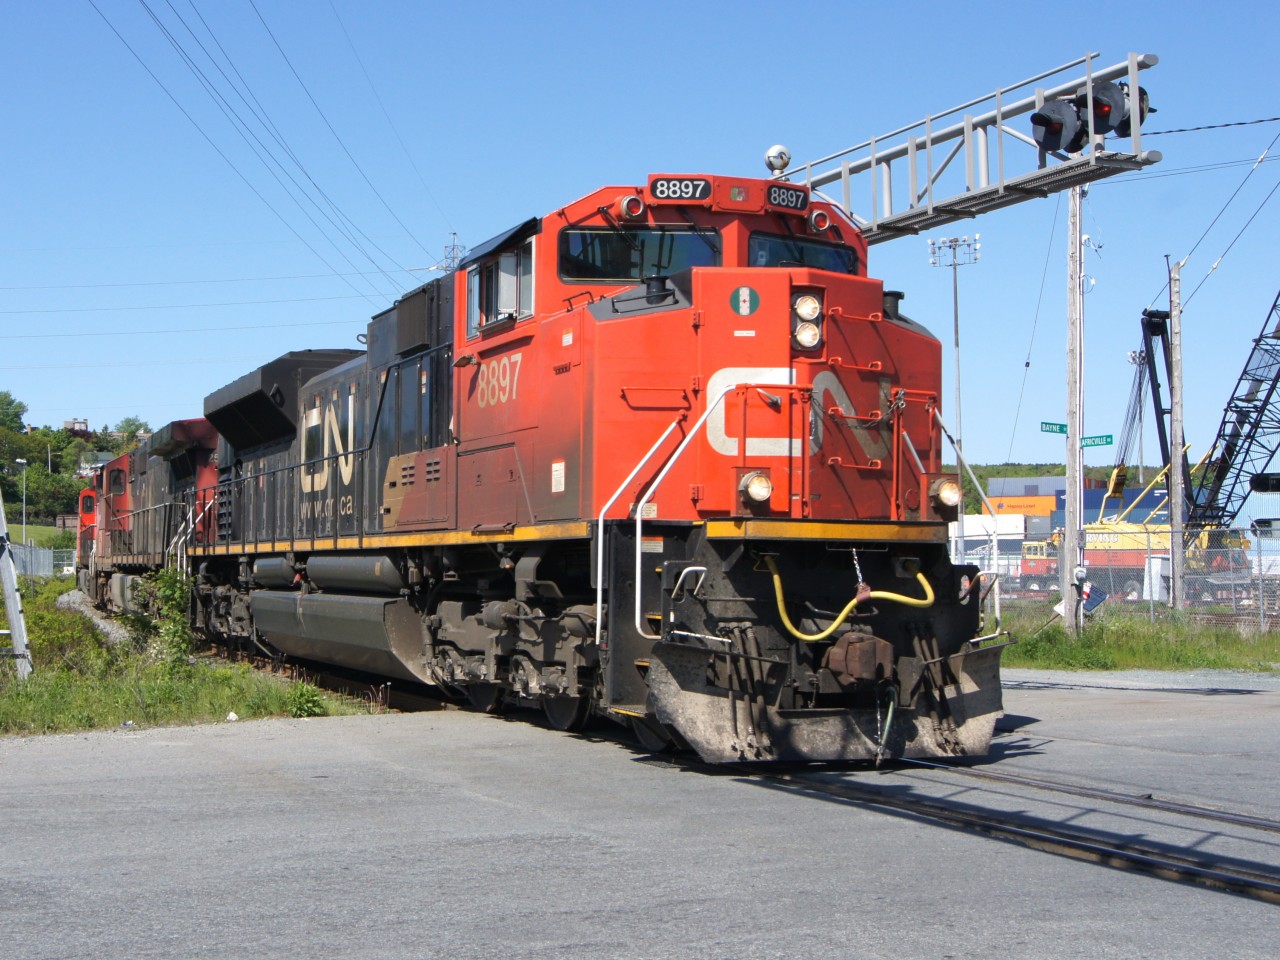 About to lift its train for its journey west, train 121 heads towards Halifax's Intermodal Terminal.